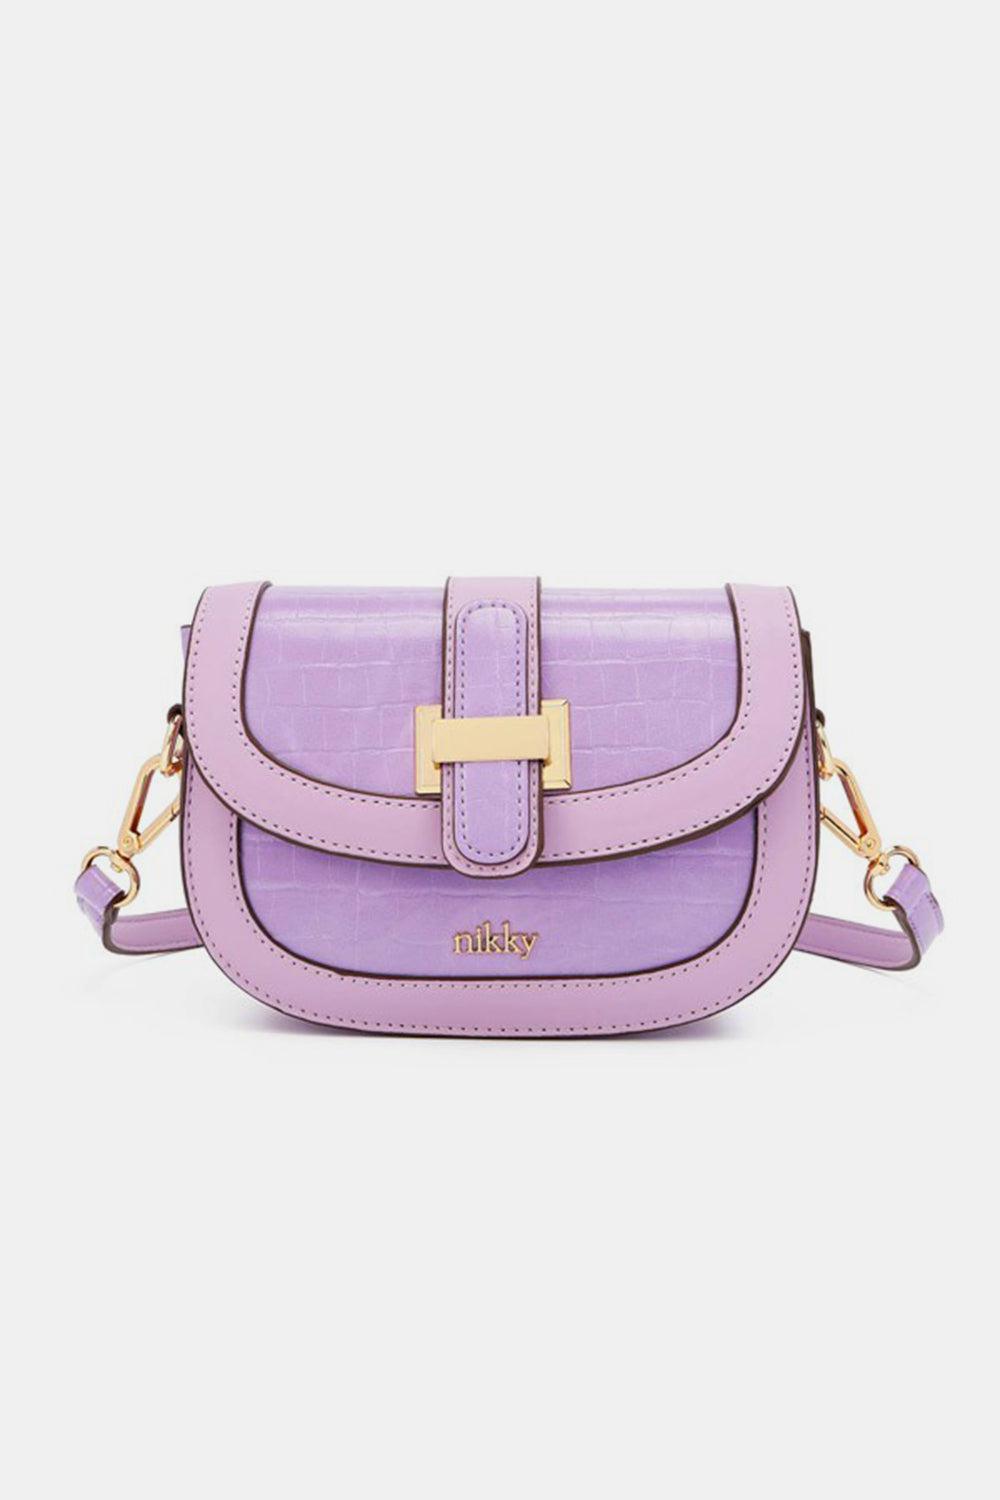 a small purple purse with a gold buckle